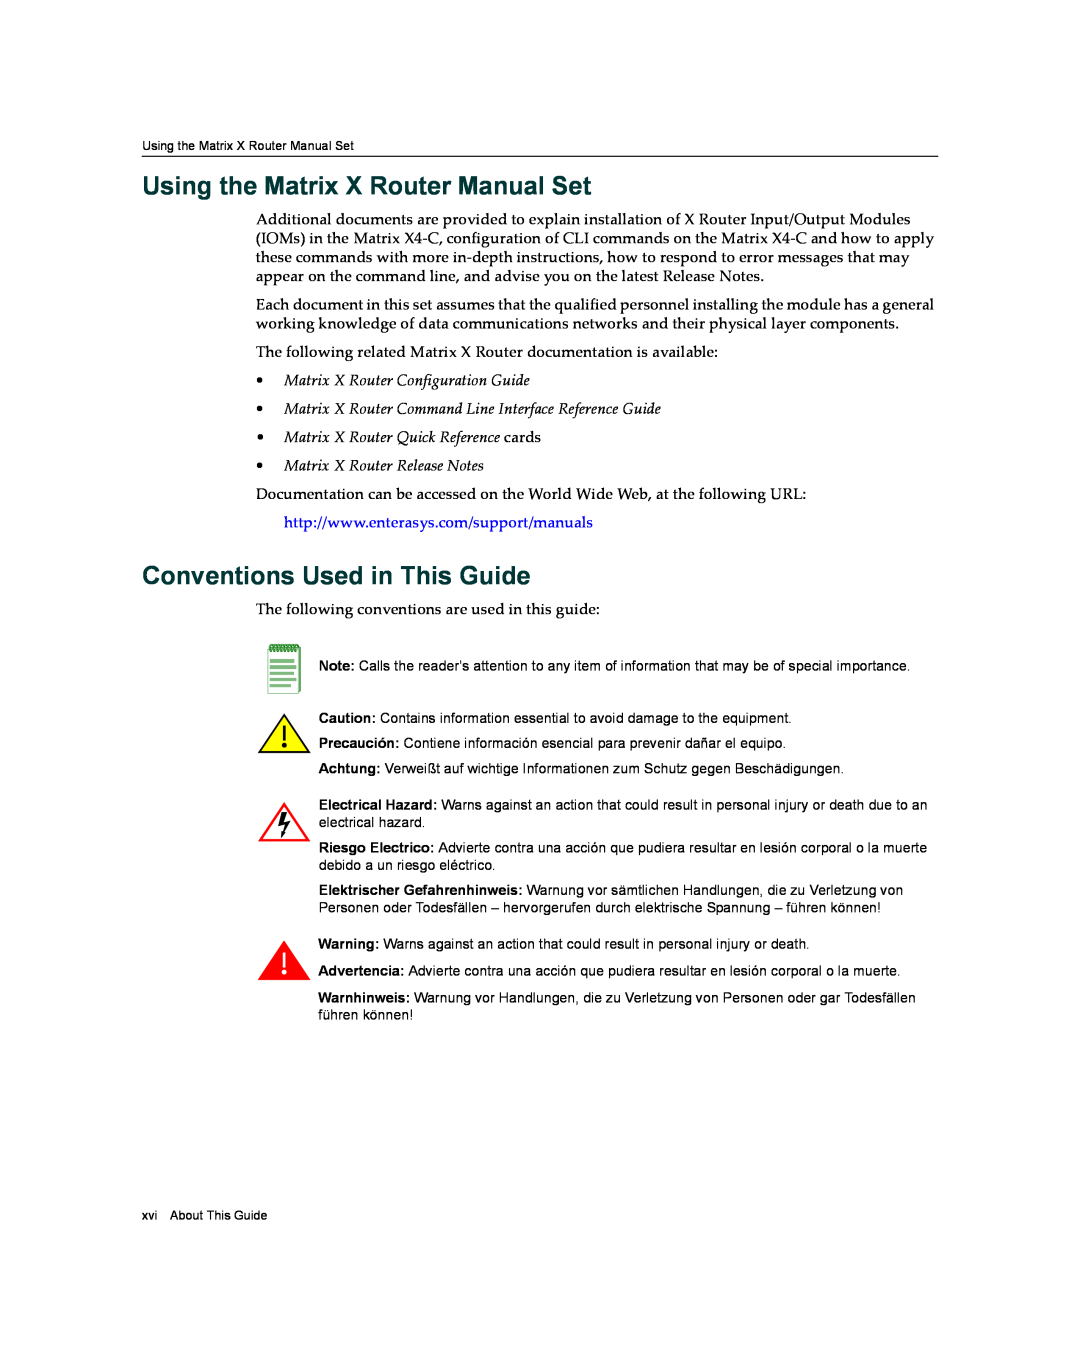 Enterasys Networks X009-U manual Using the Matrix X Router Manual Set, Conventions Used in This Guide 